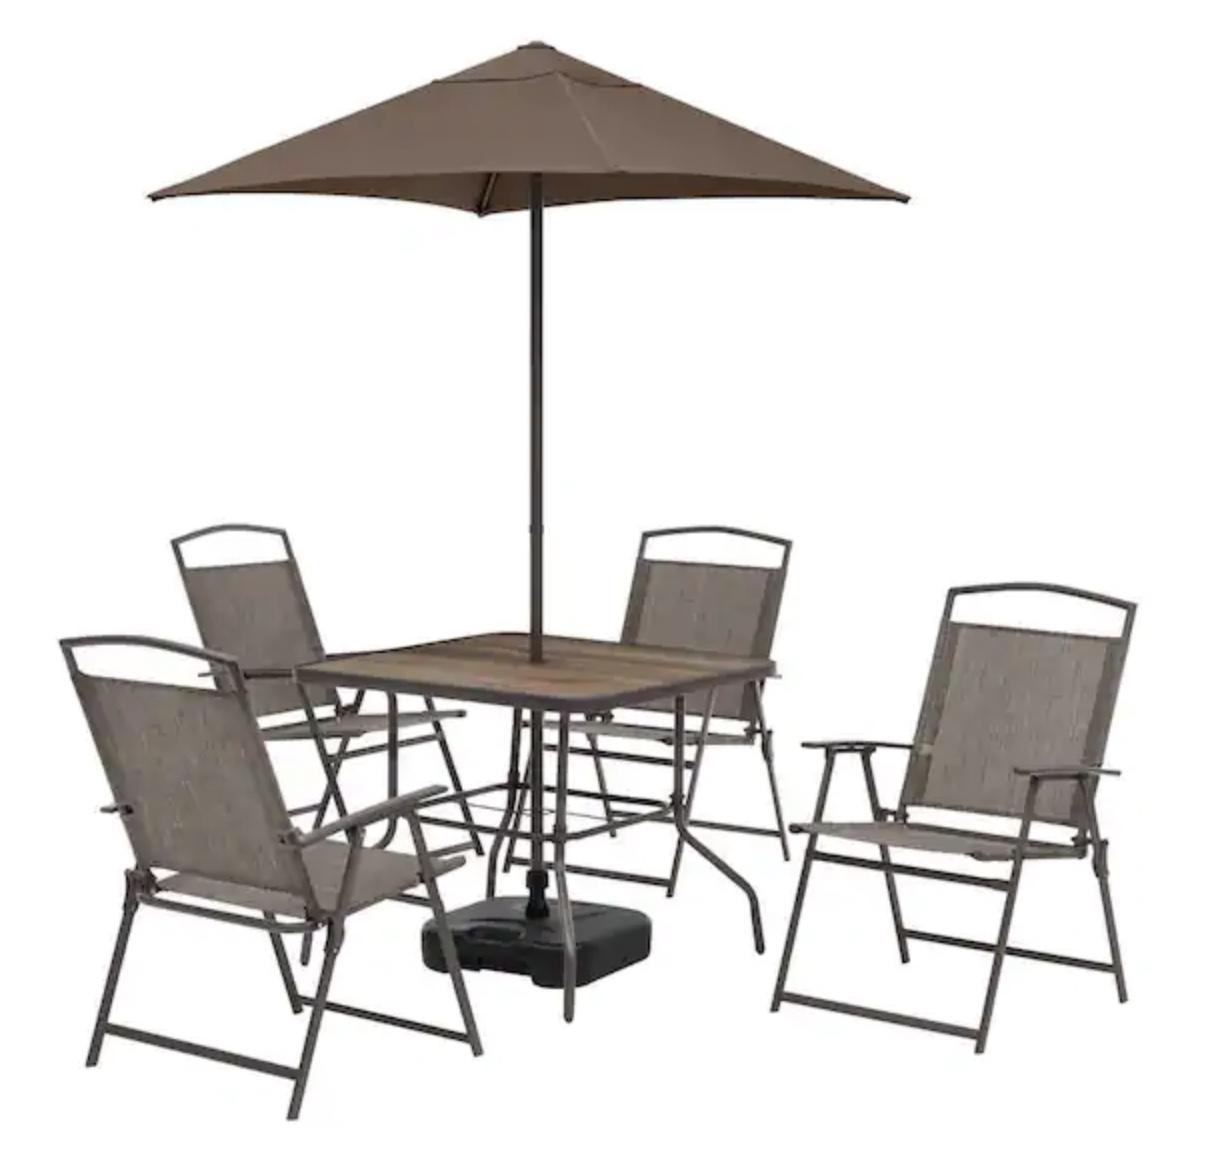 StyleWell Mix and Match Metal Outdoor Dining Set for $140 Shipped